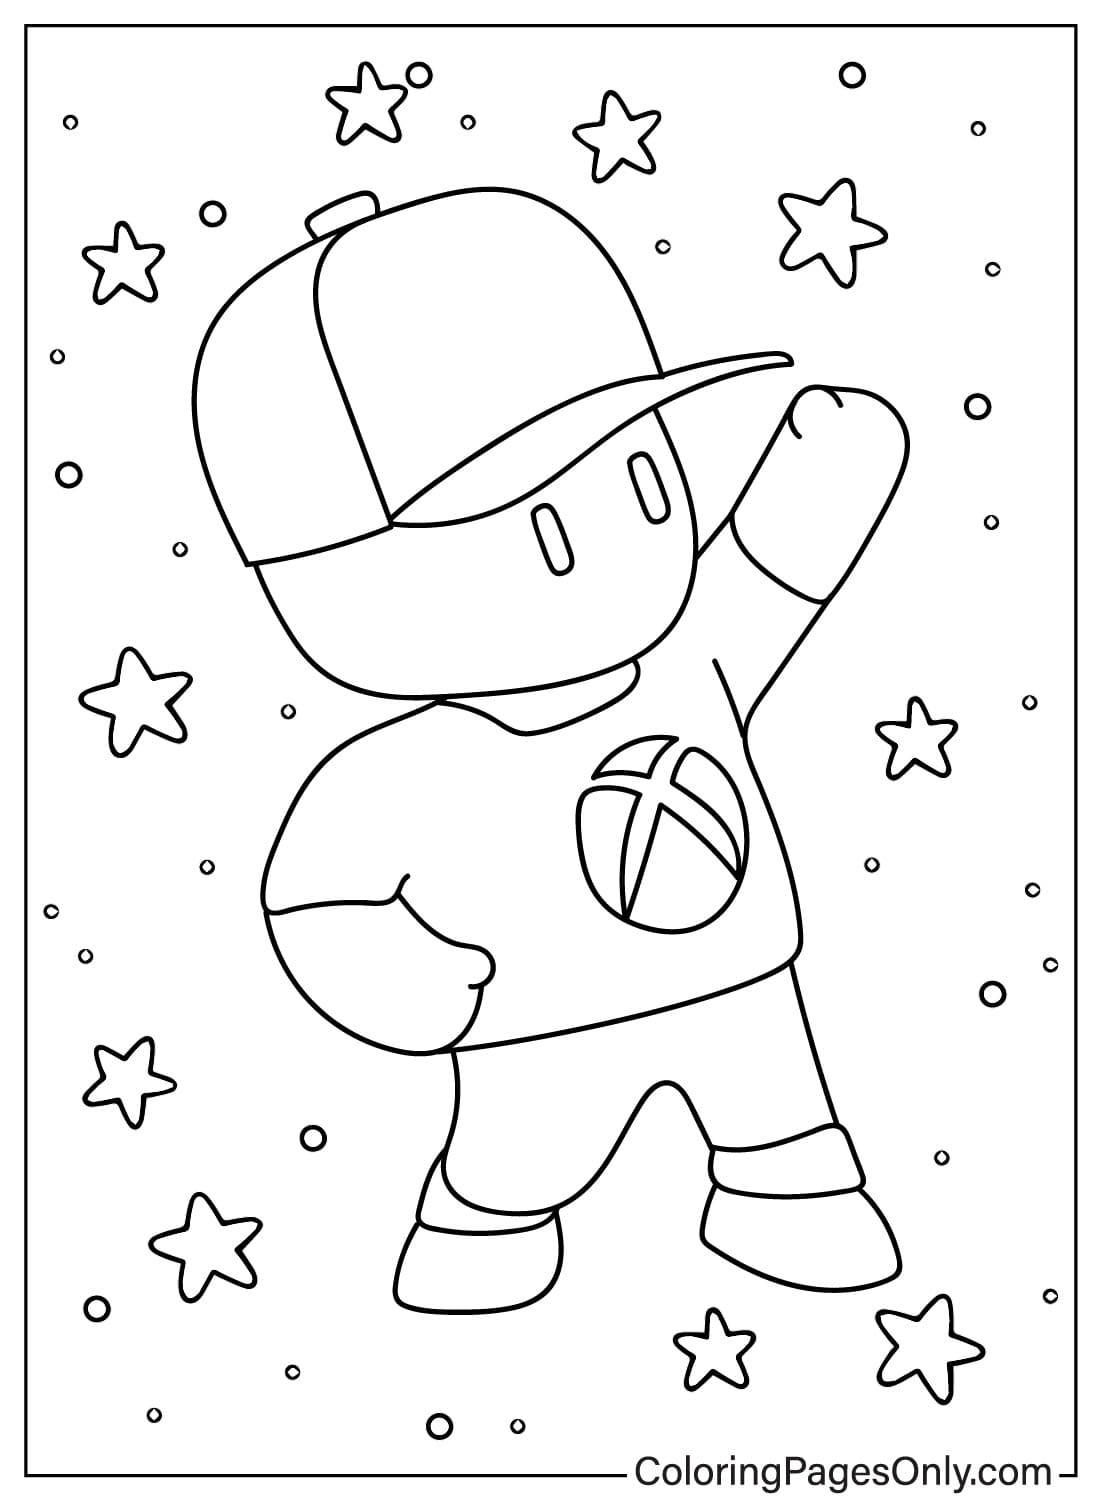 Stumble Guys Coloring Pages to for Kids from Stumble Guys